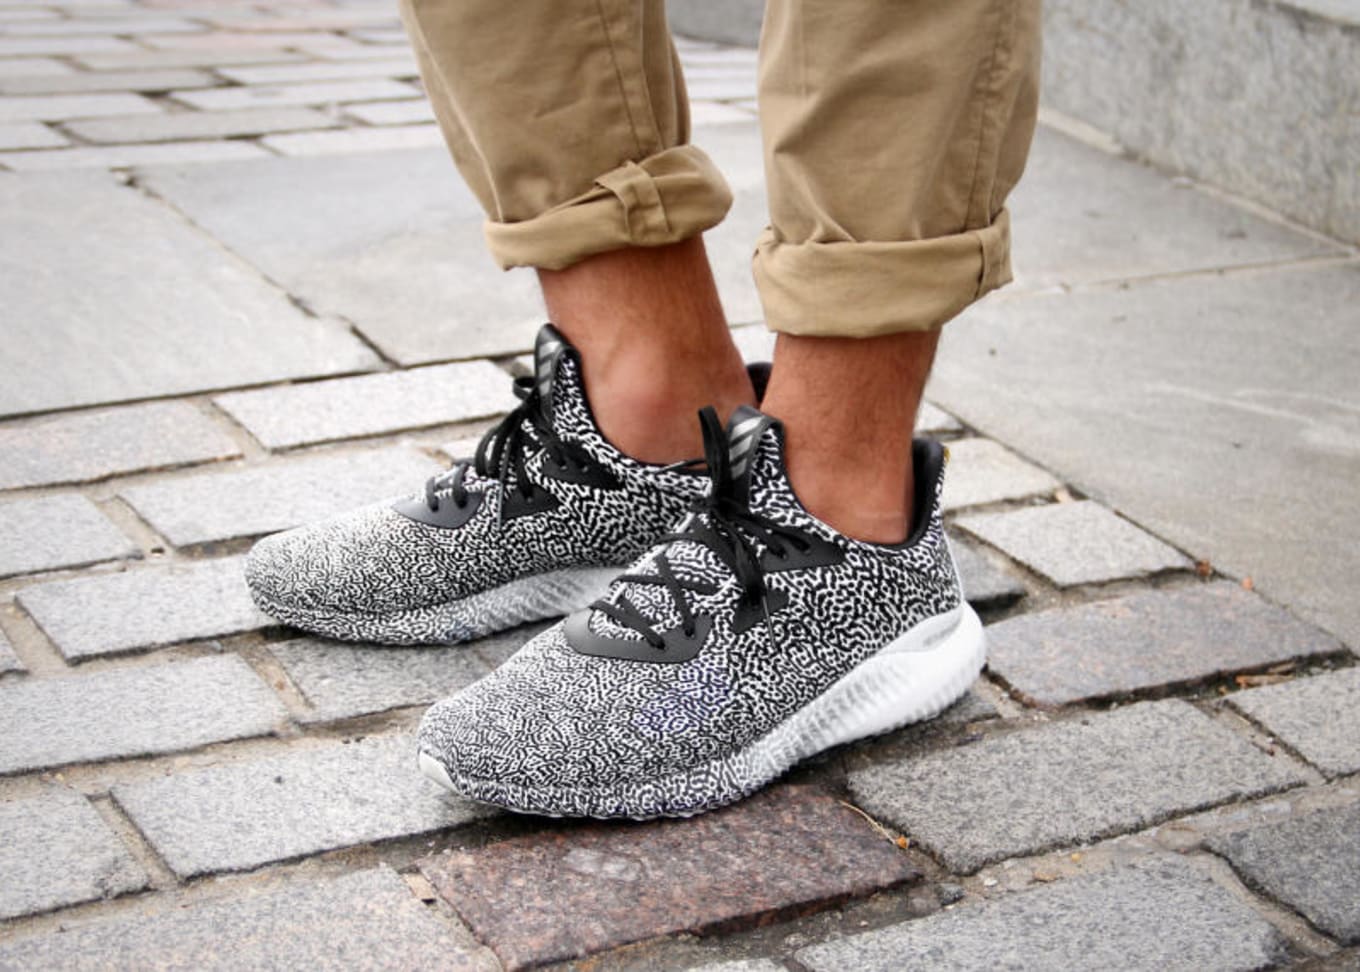 adidas AlphaBOUNCE Style | Sole Collector